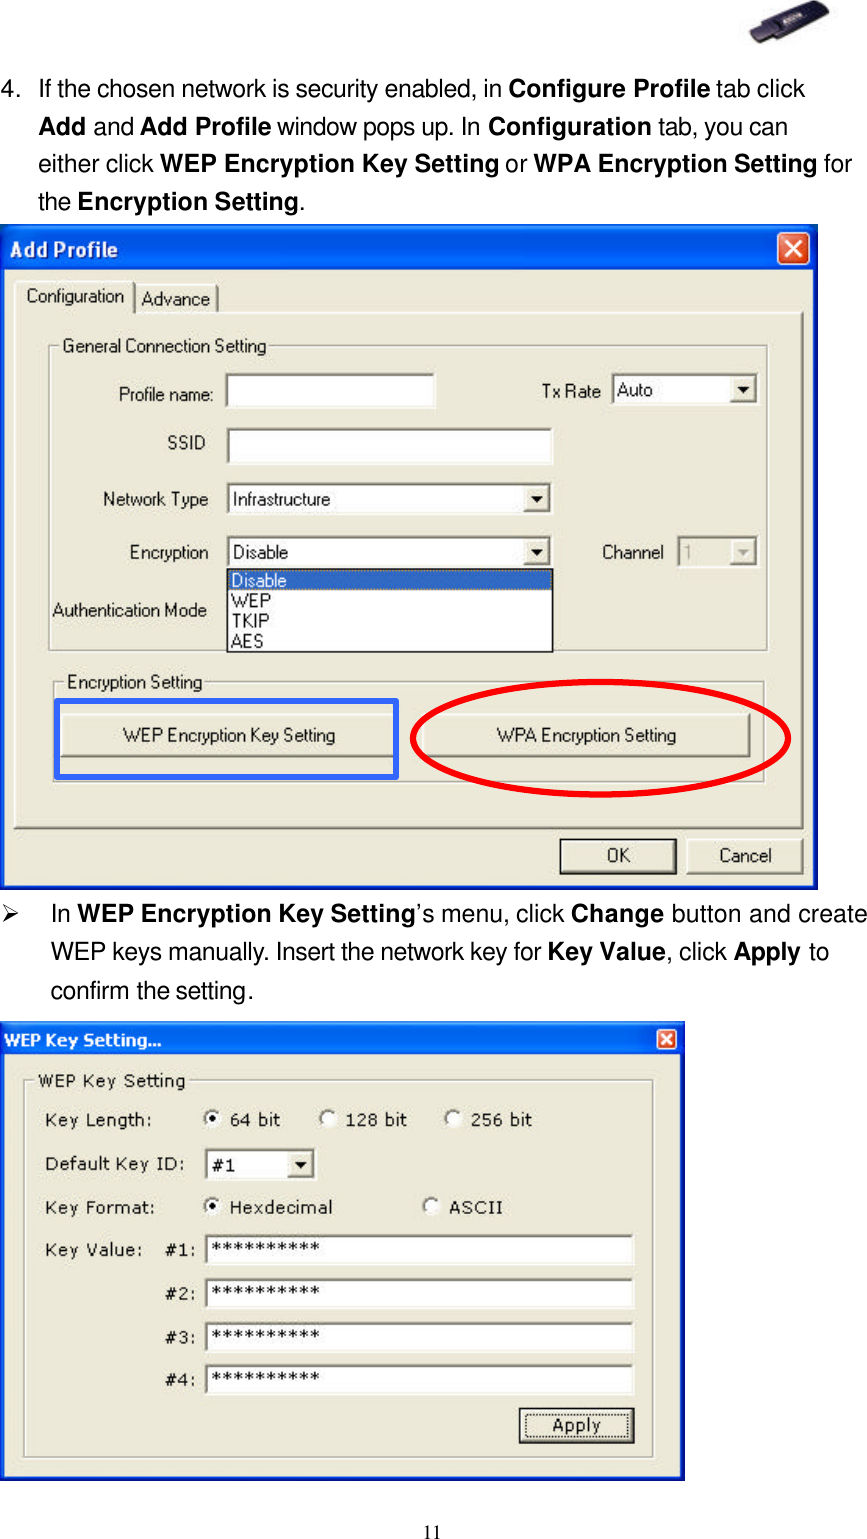   11 4. If the chosen network is security enabled, in Configure Profile tab click Add and Add Profile window pops up. In Configuration tab, you can either click WEP Encryption Key Setting or WPA Encryption Setting for the Encryption Setting.  Ø In WEP Encryption Key Setting’s menu, click Change button and create WEP keys manually. Insert the network key for Key Value, click Apply to confirm the setting.   